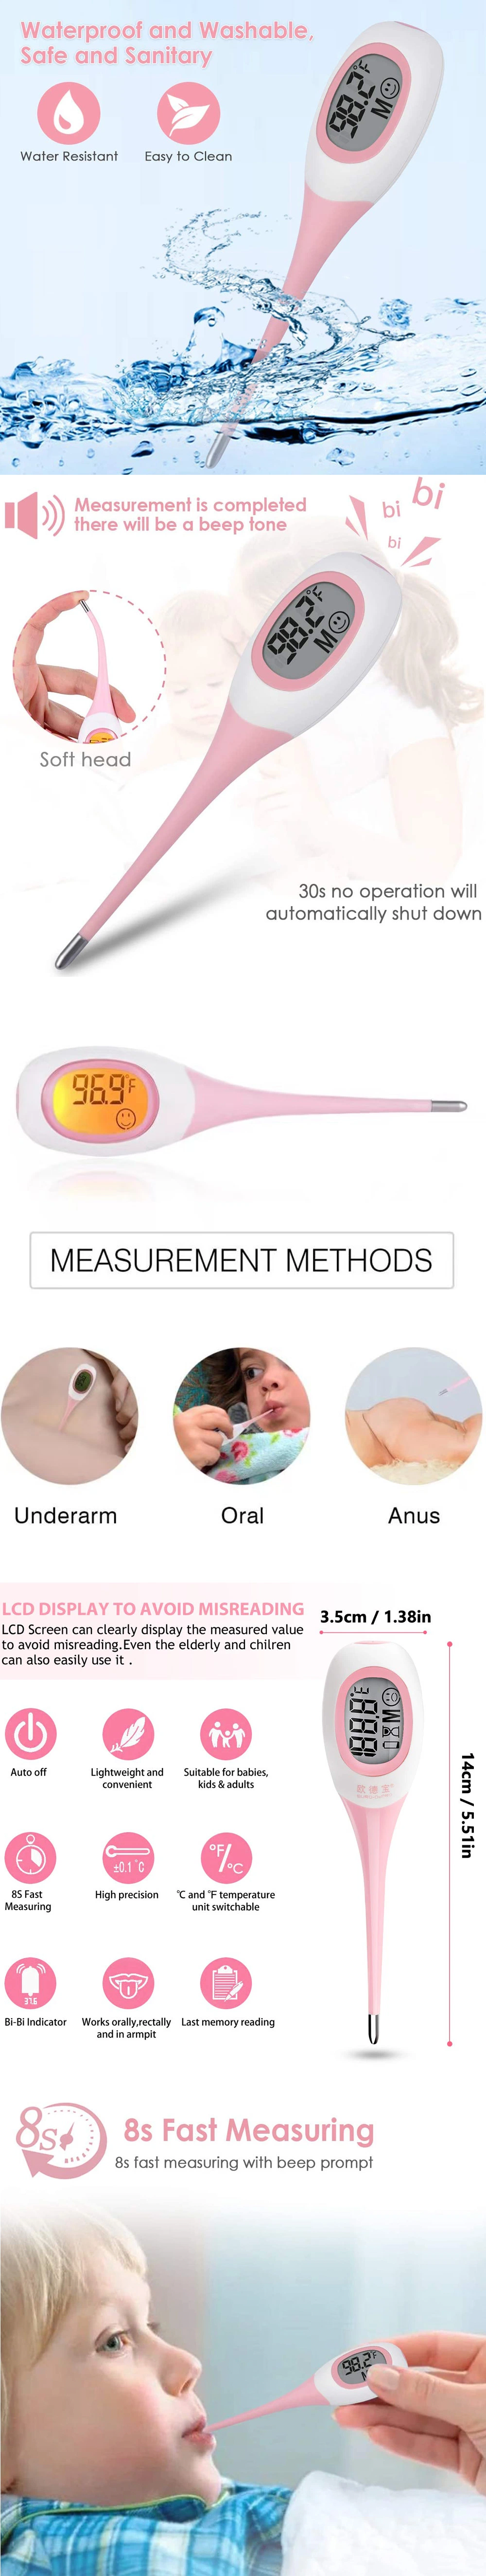 Digital Thermometer Hard Head/Soft Head/Flexible Tip Digital Thermometer Waterproof with Battery for Adult Children